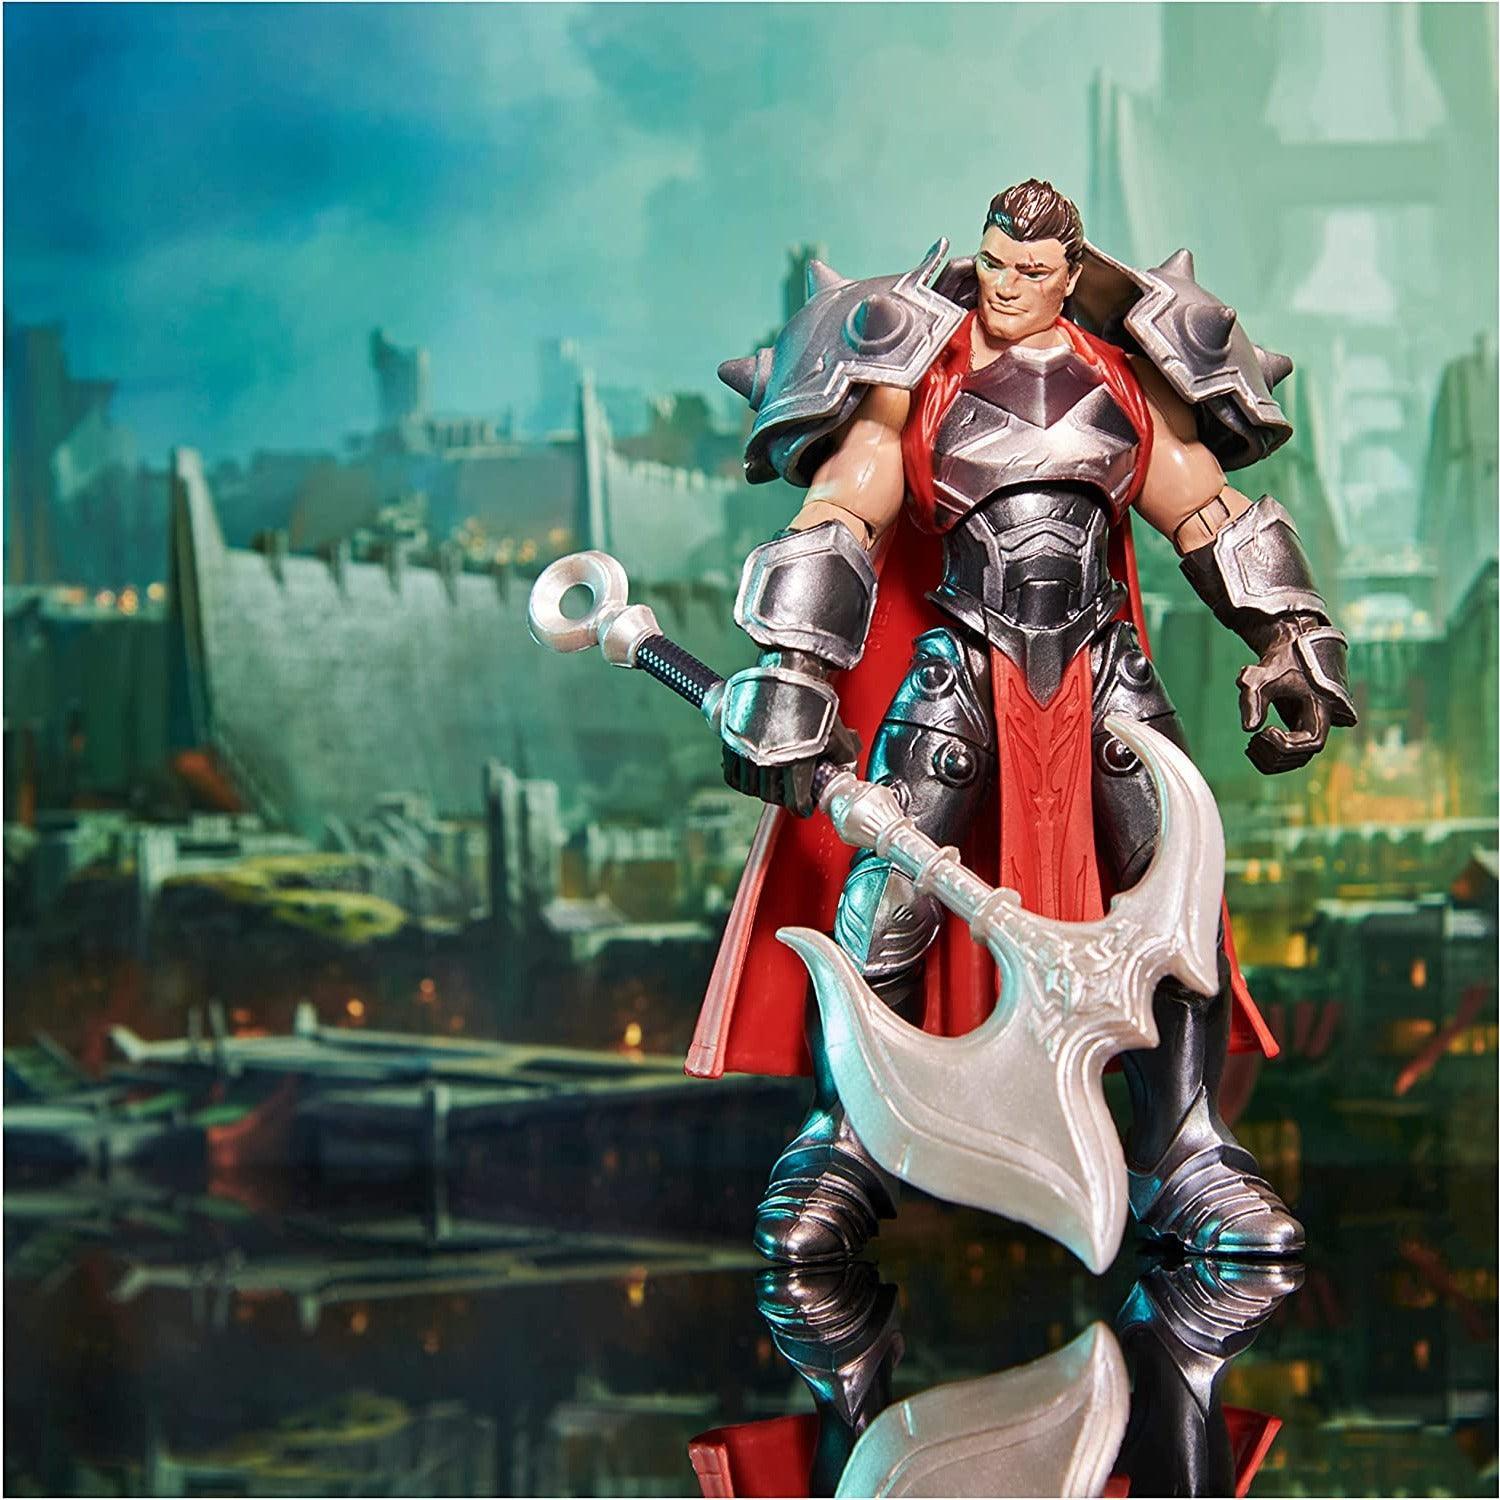 League of Legends 4-Inch Darius Collectible Figure With Premium Details and Axe Accessory, The Champion Collection, Collector Grade - BumbleToys - 5-7 Years, Boys, Characters, DC, EXO, Figures, Pre-Order